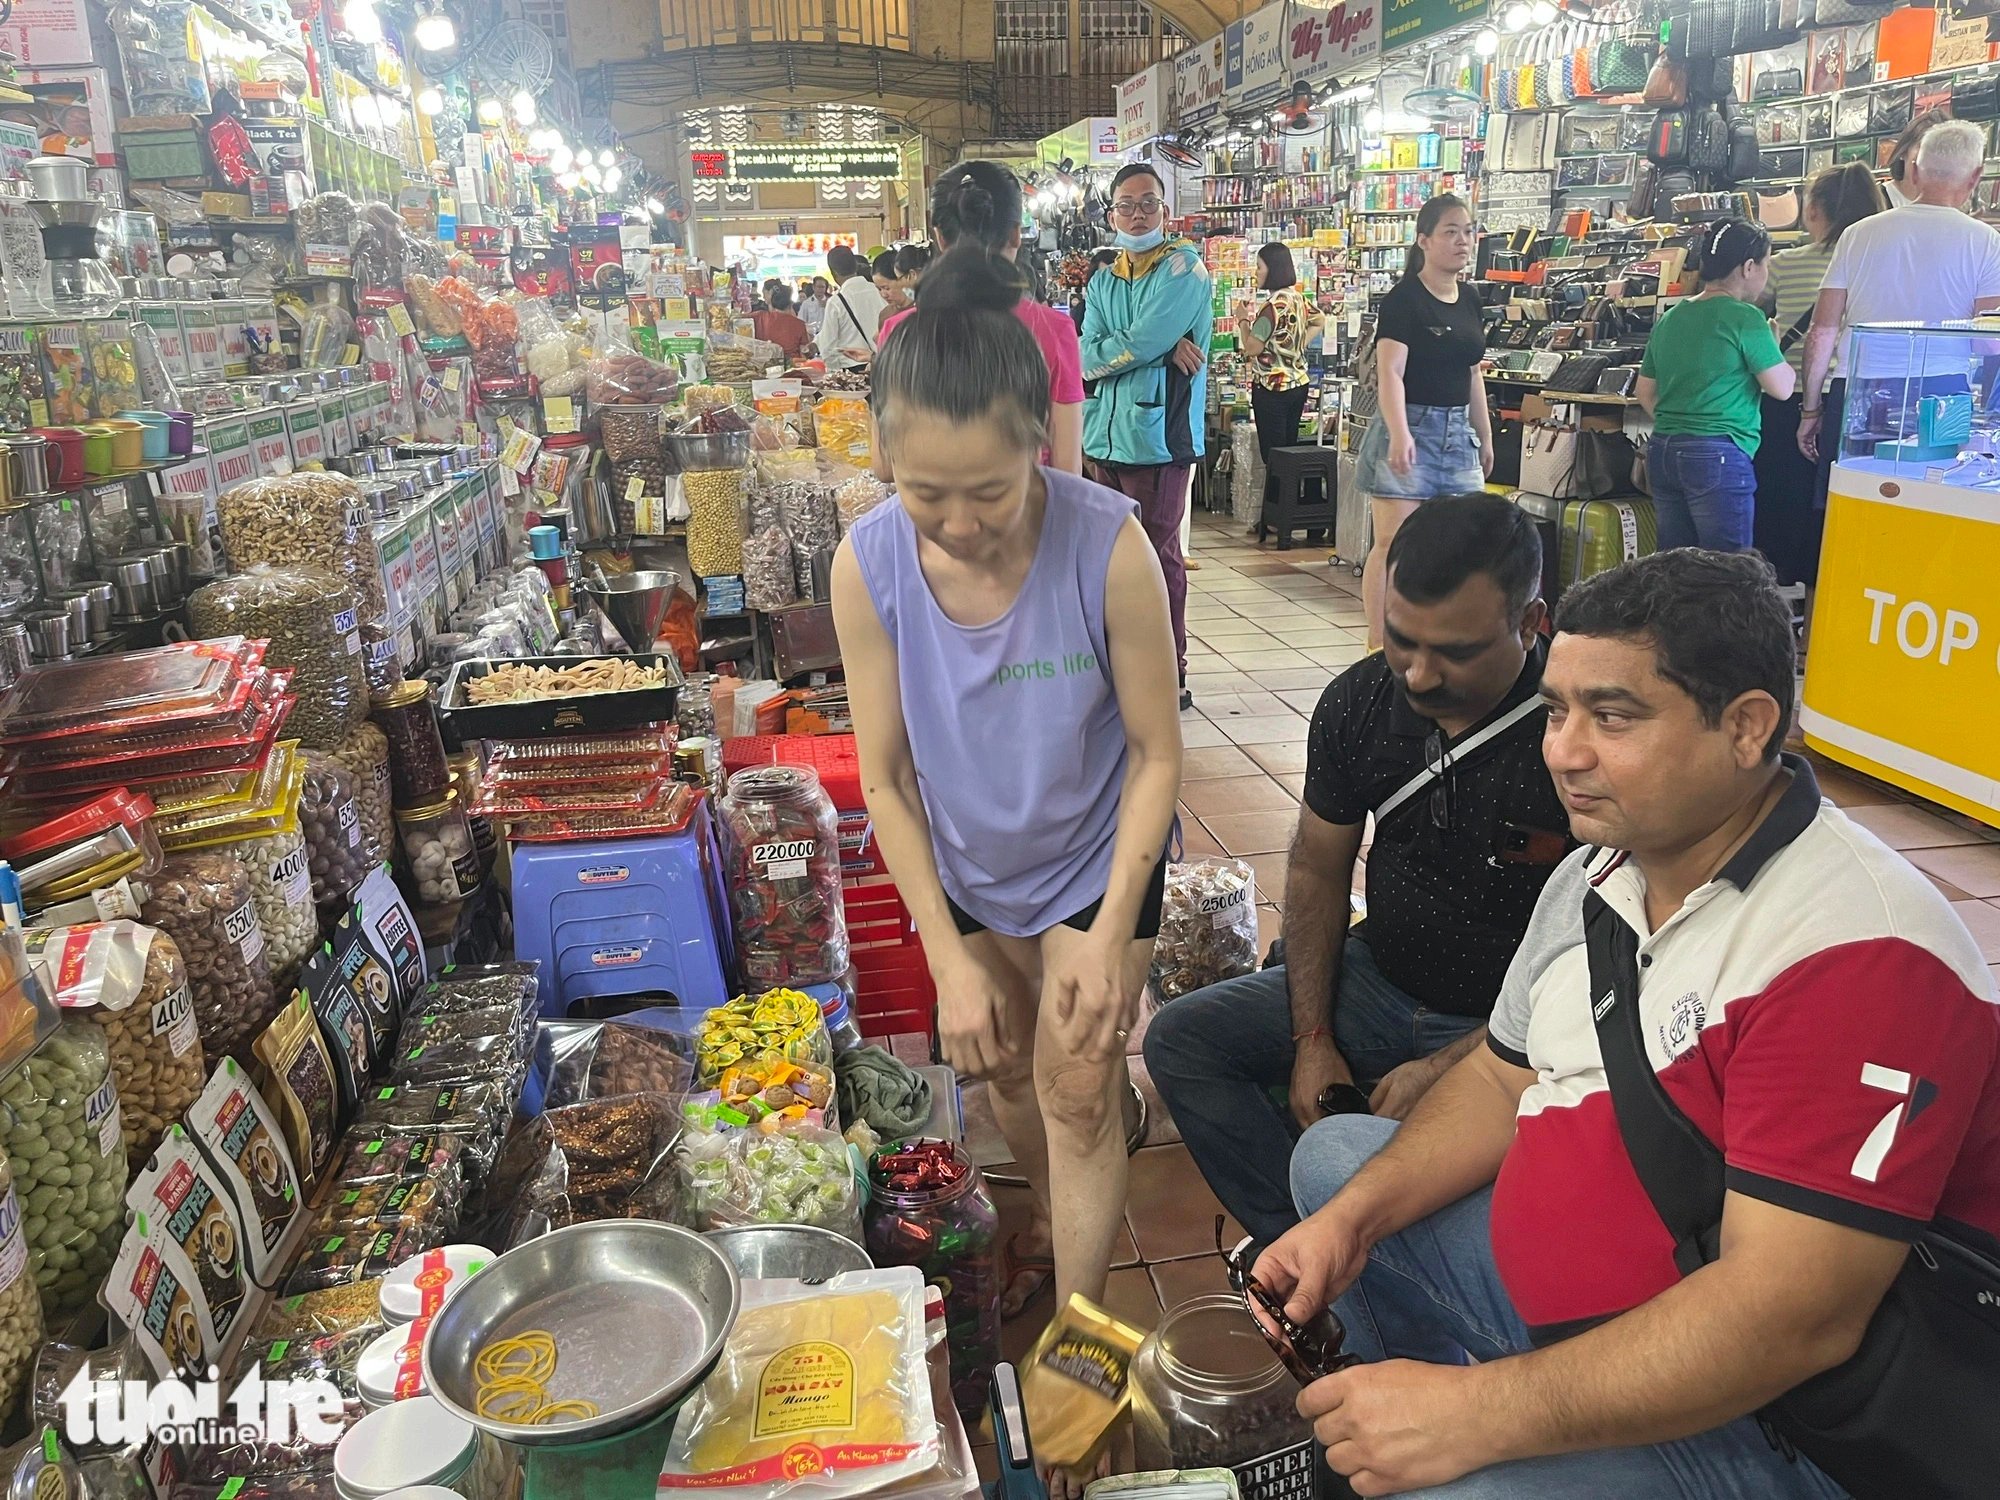 Tourits shop at Ben Thanh Market in District 1, Ho Chi Minh City ahead of Tet holiday. Photo: N.Binh / Tuoi Tre